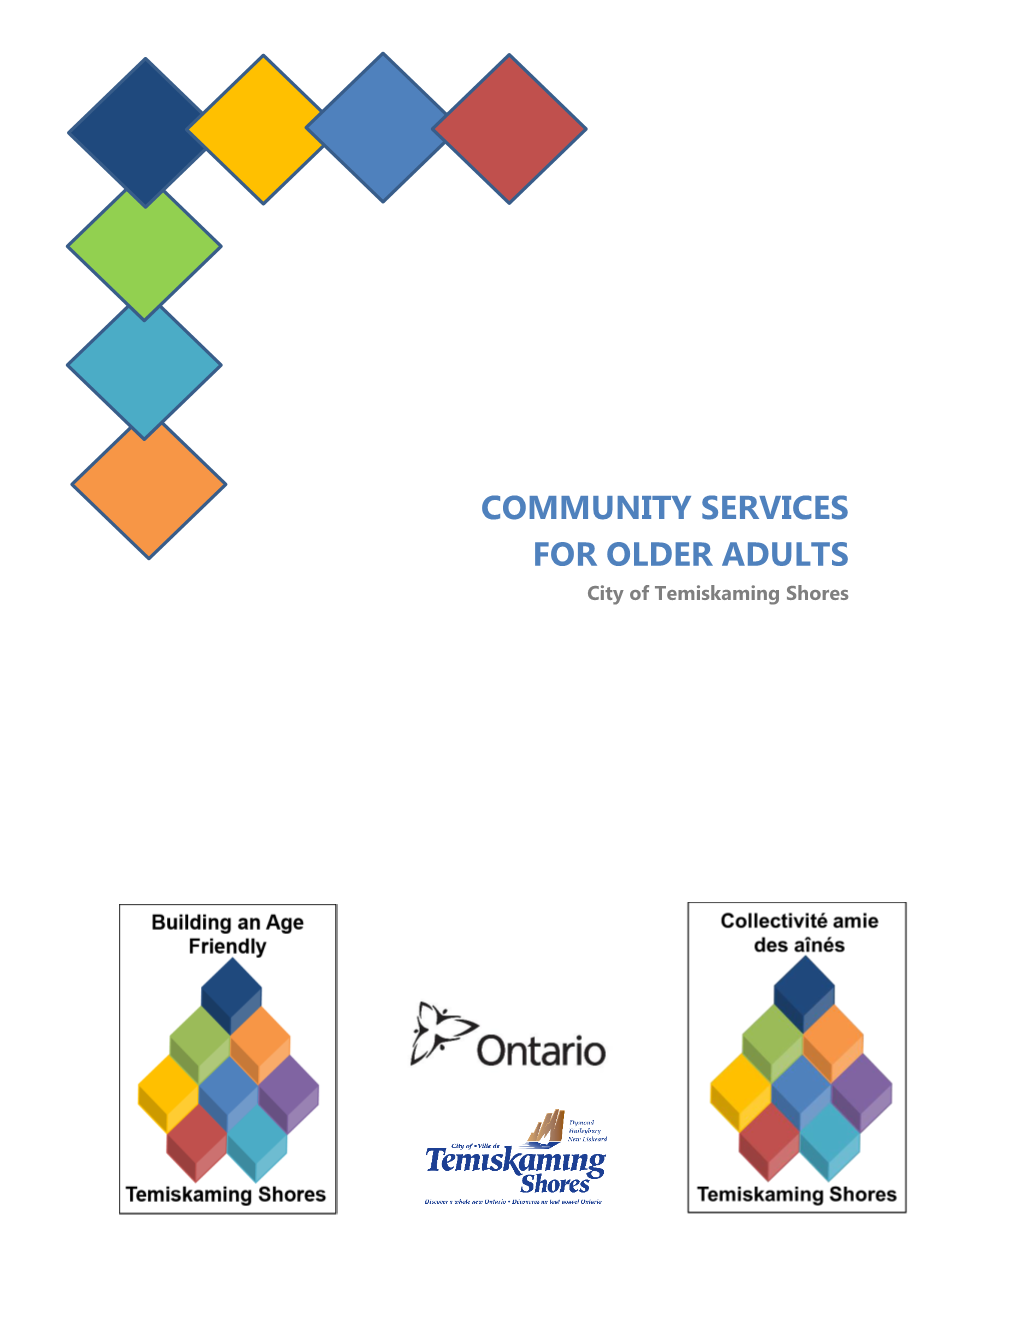 COMMUNITY SERVICES for OLDER ADULTS City of Temiskaming Shores